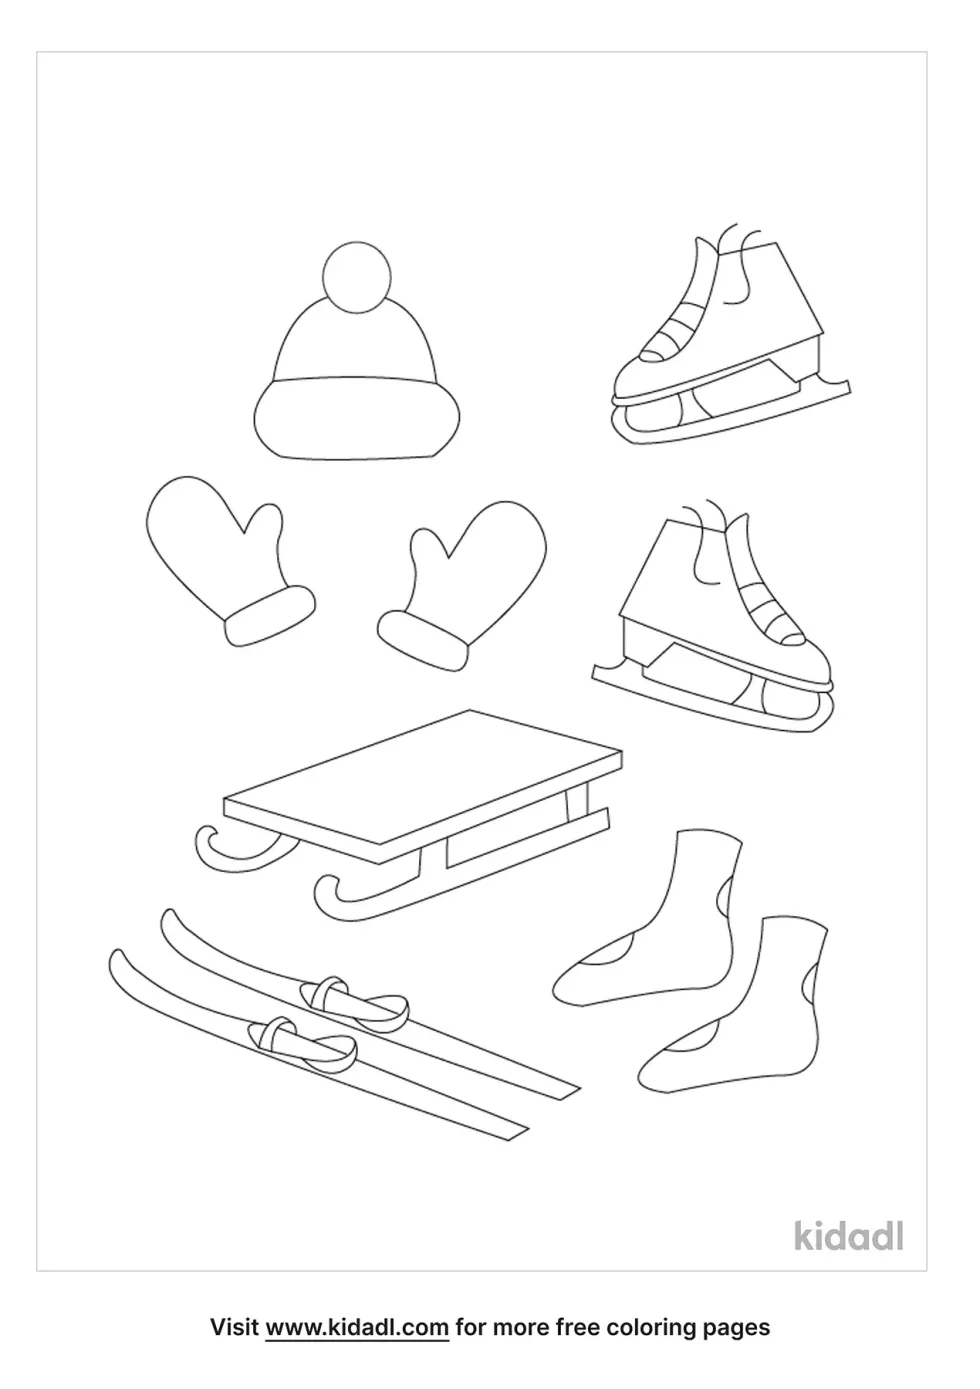 Items Used In Winter Sports Coloring Page